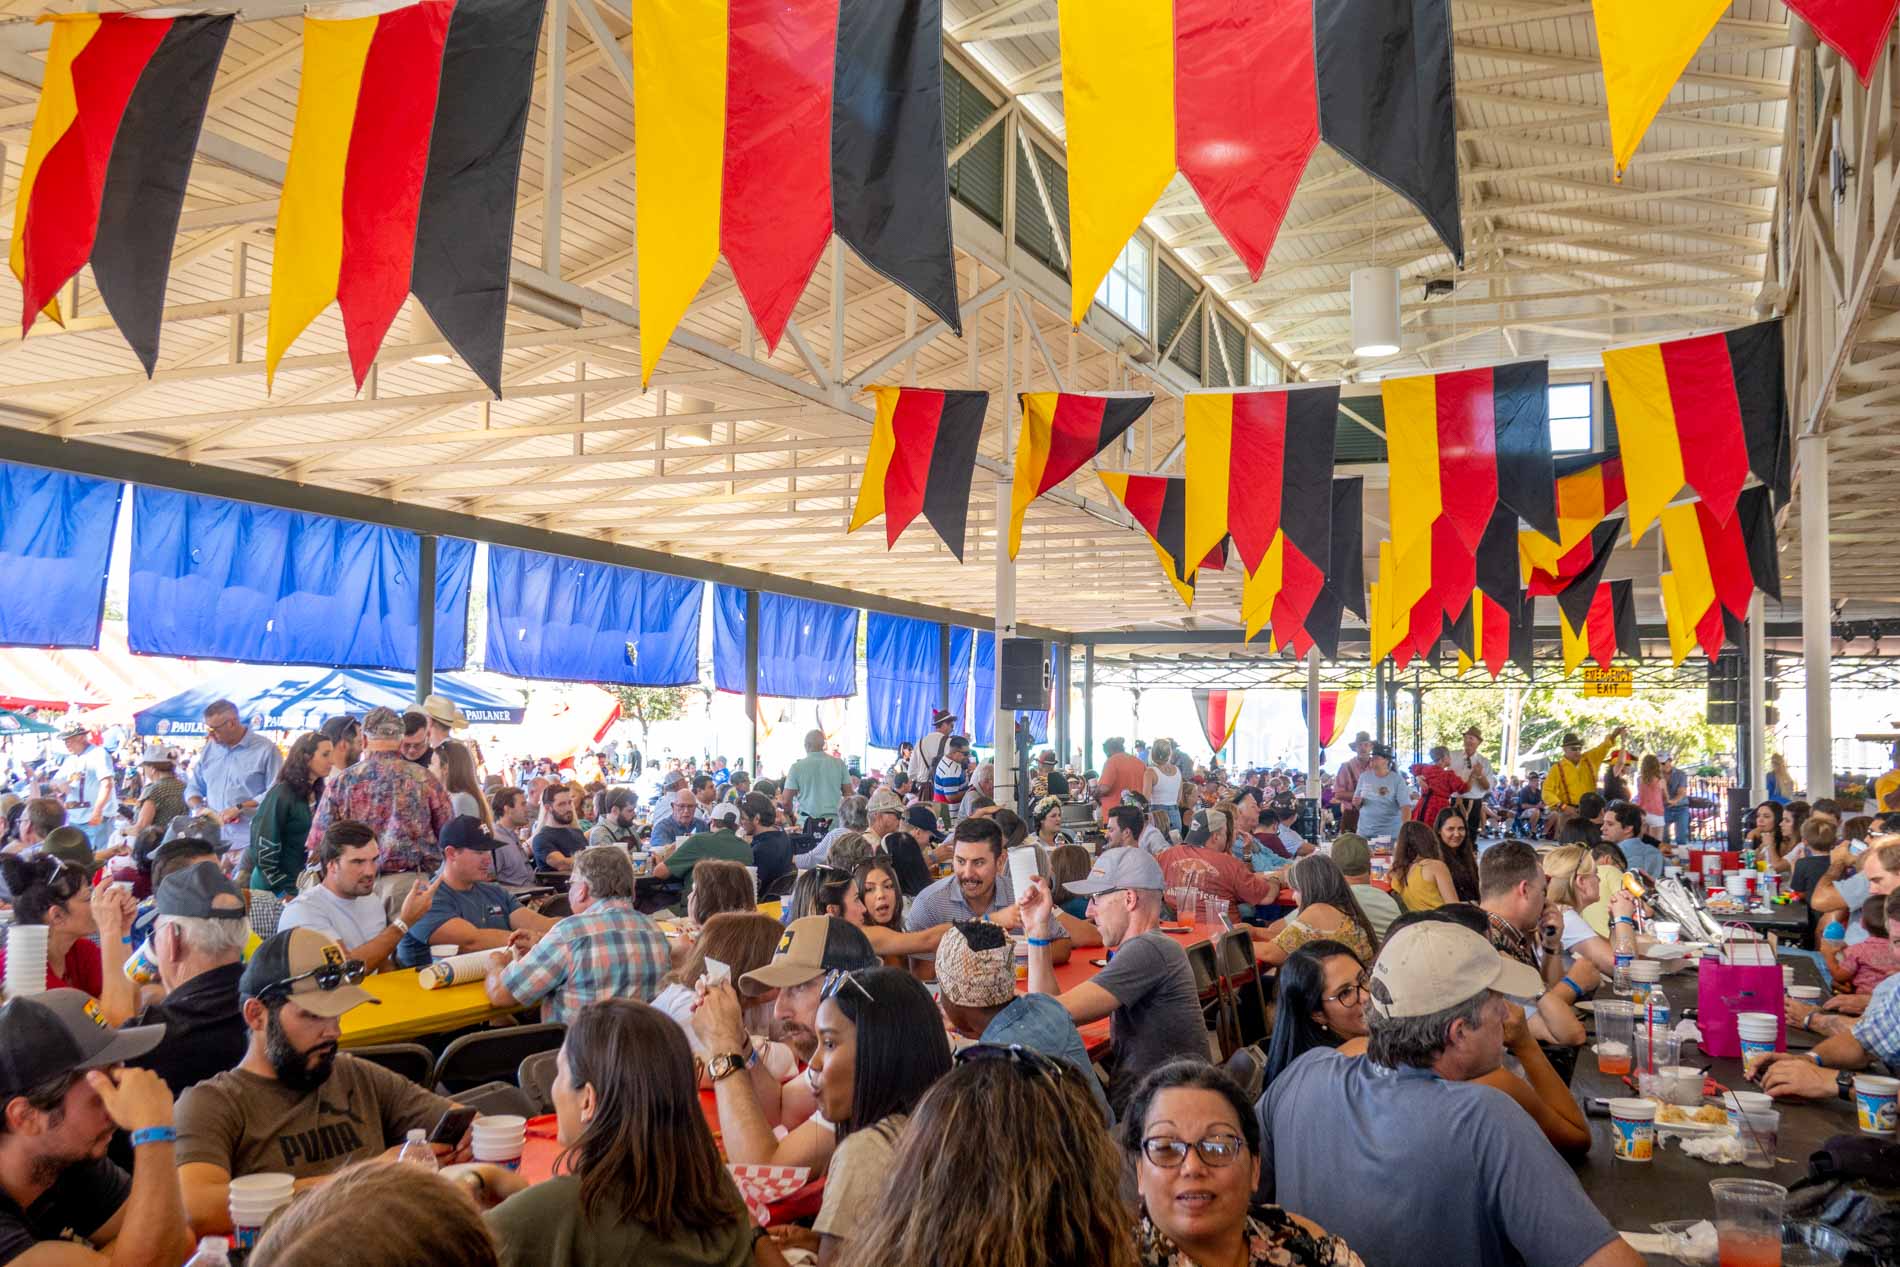 People sitting at tables at a festival tent under a canopy of German flags